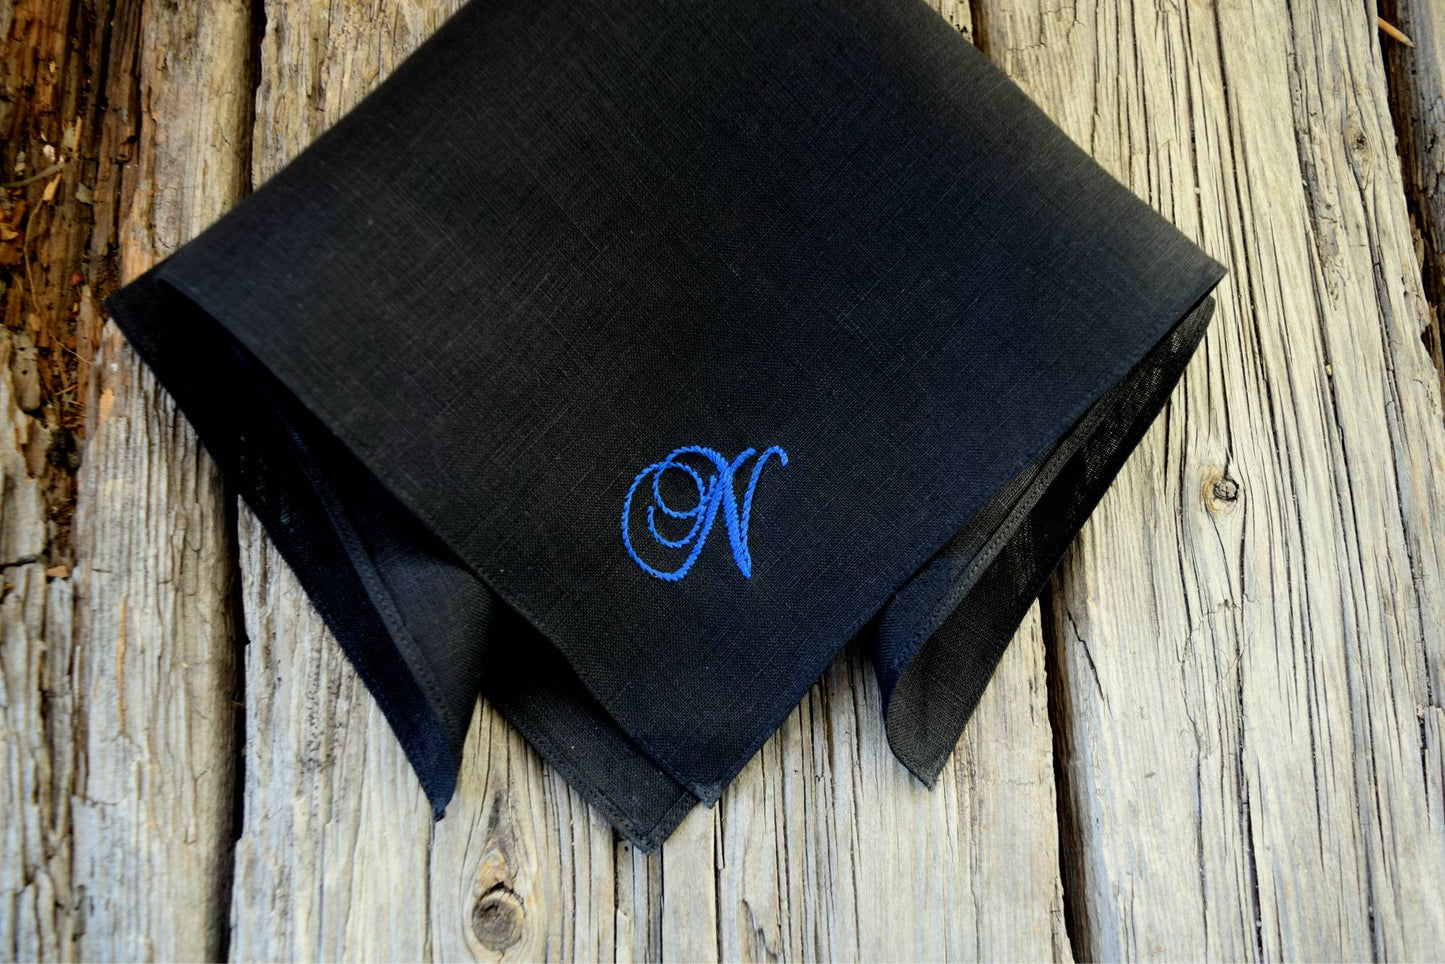 Black hanky monogrammed with one letter in blue cursive